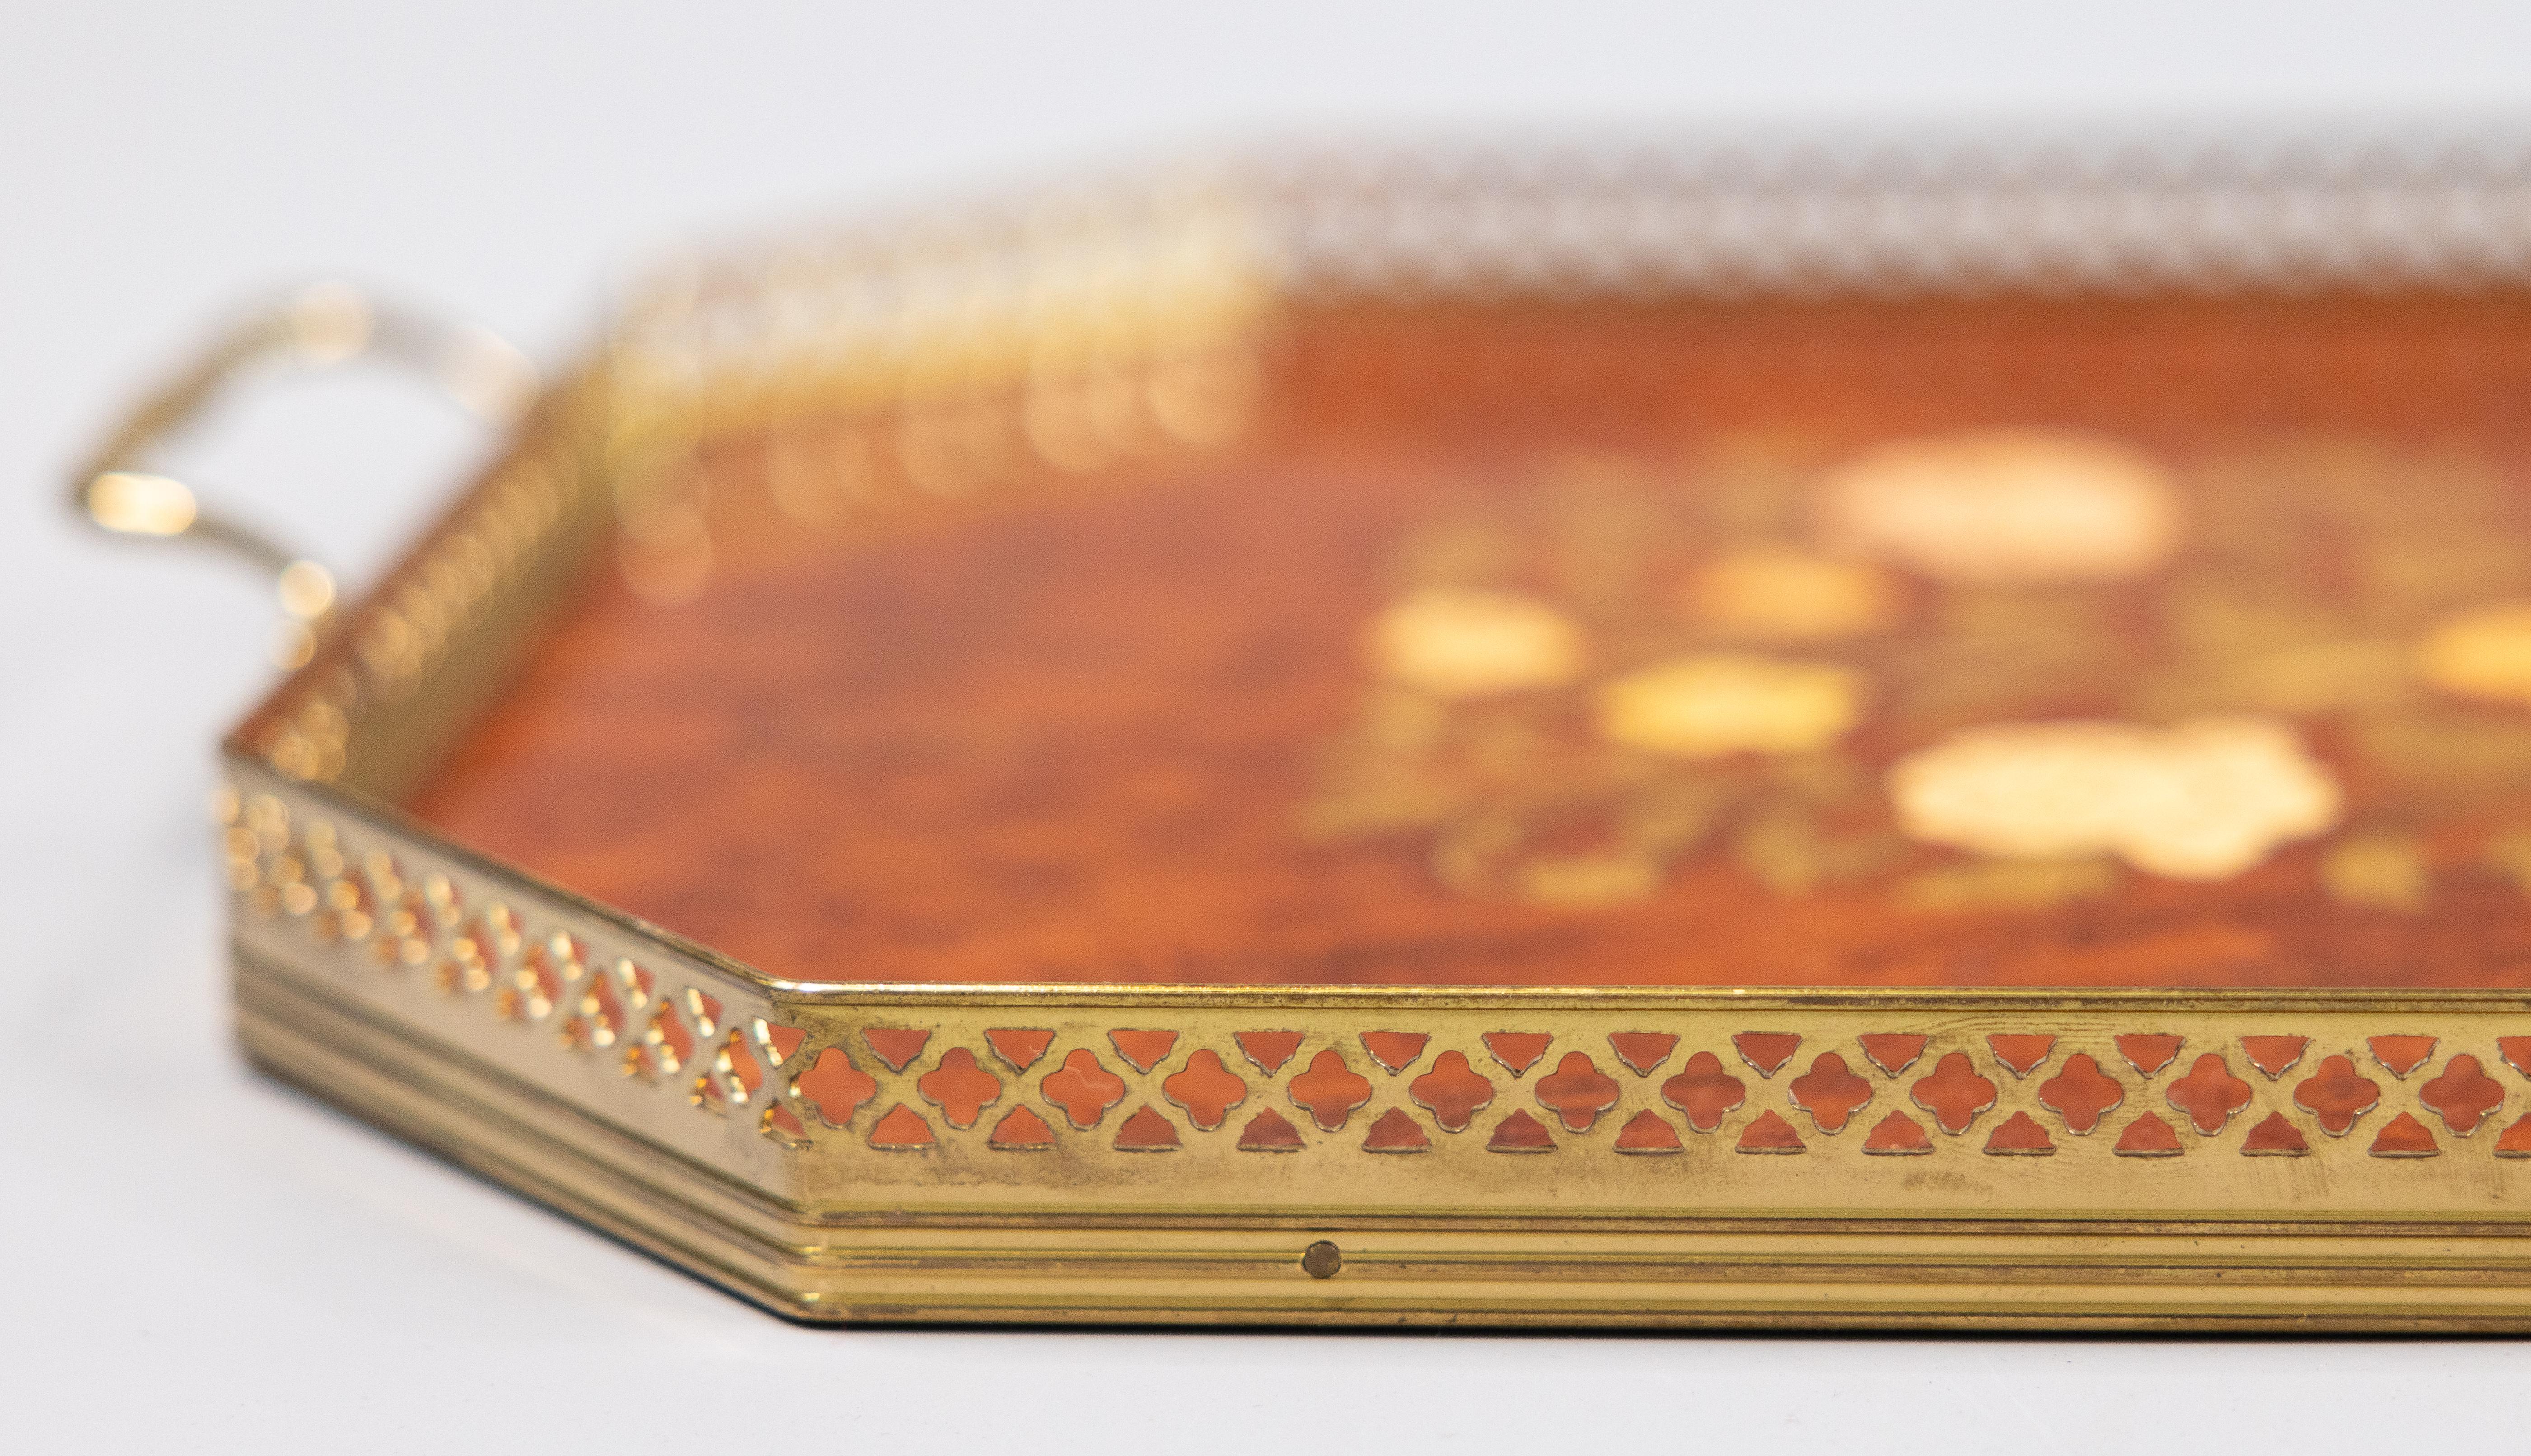 Inlay Italian Marquetry Inlaid Walnut & Brass Gallery Octagonal Serving Tray, c. 1950 For Sale